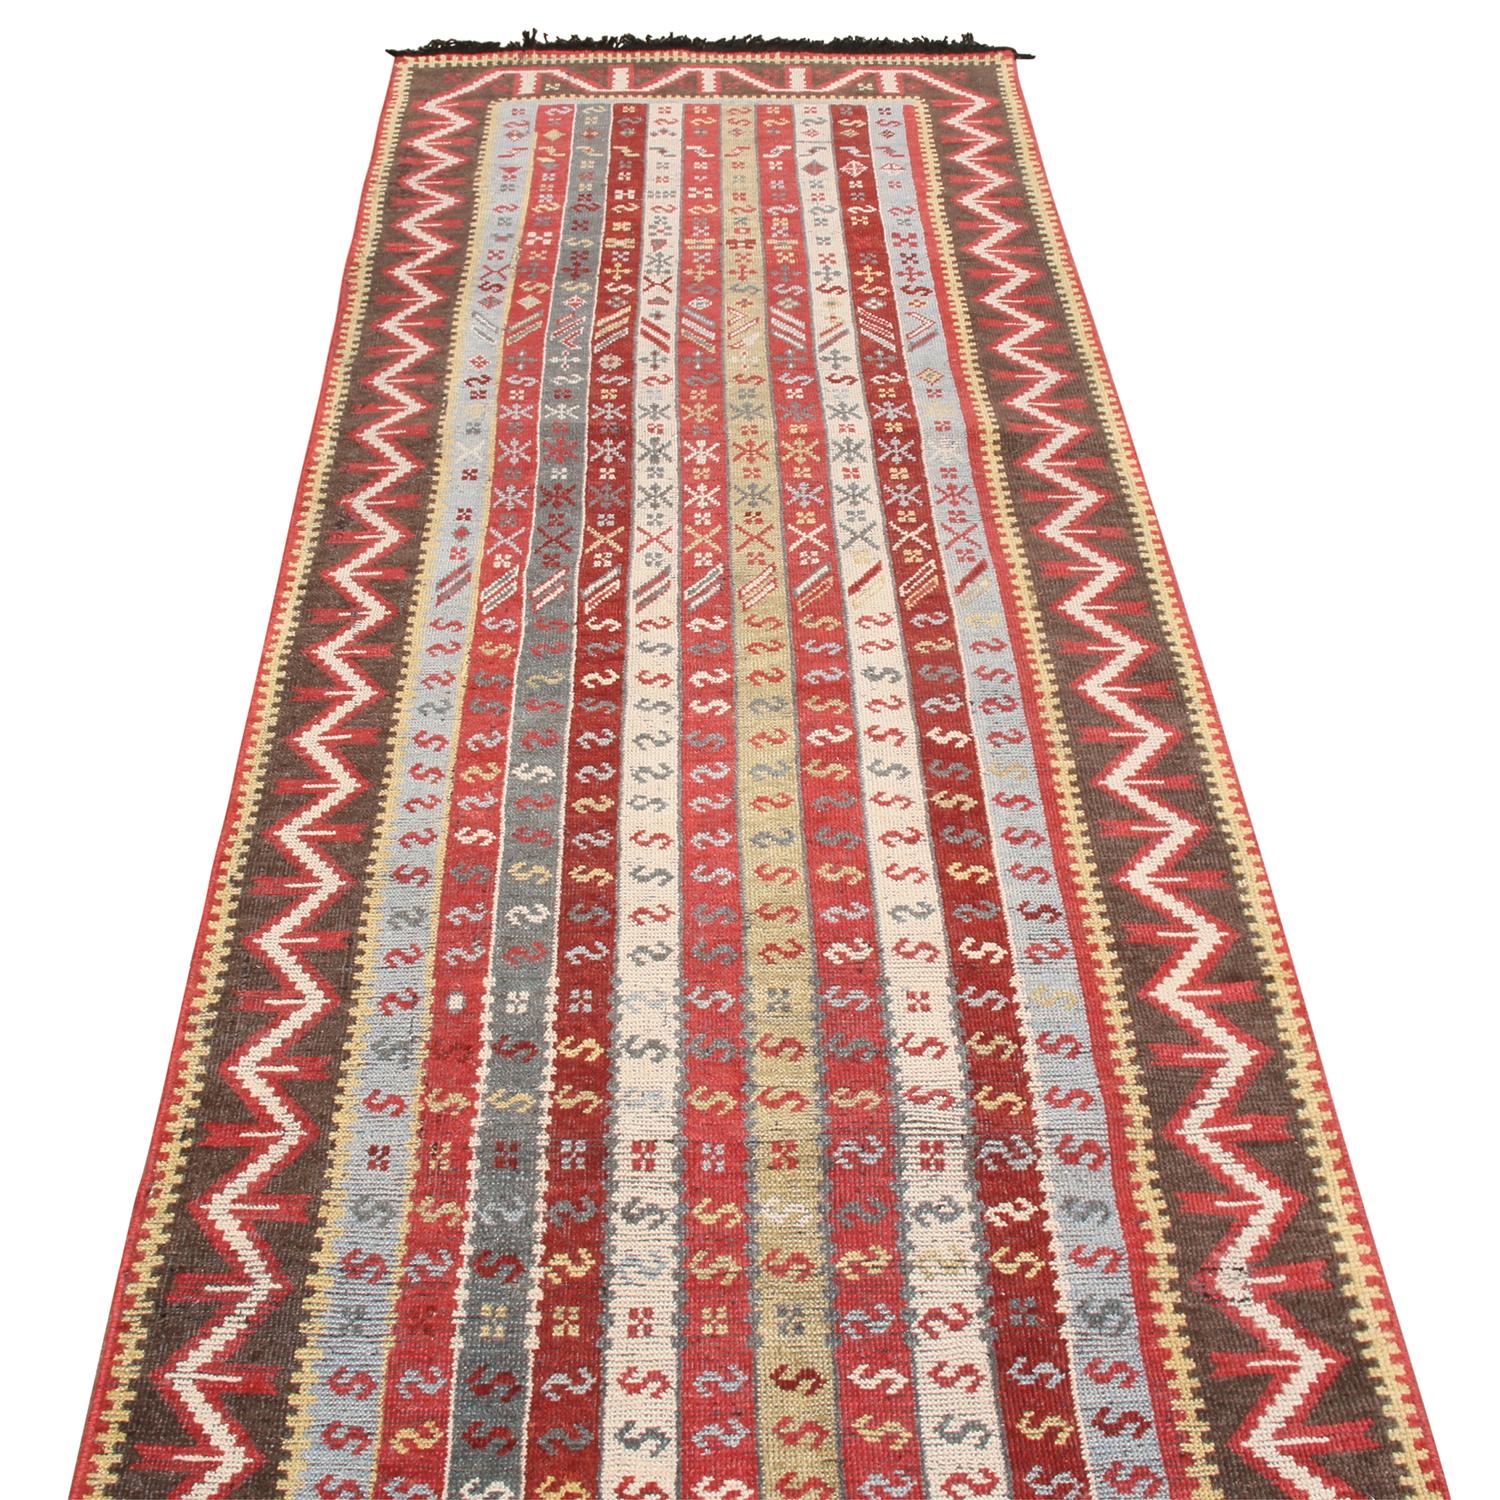 Hand knotted with high-quality wool originating from India, this contemporary rug hails from Rug & Kilim’s Burano collection, enjoying a unique take on the ‘s’ hook motif often found in inspirational Verneh and Soumak antiques believed to represent